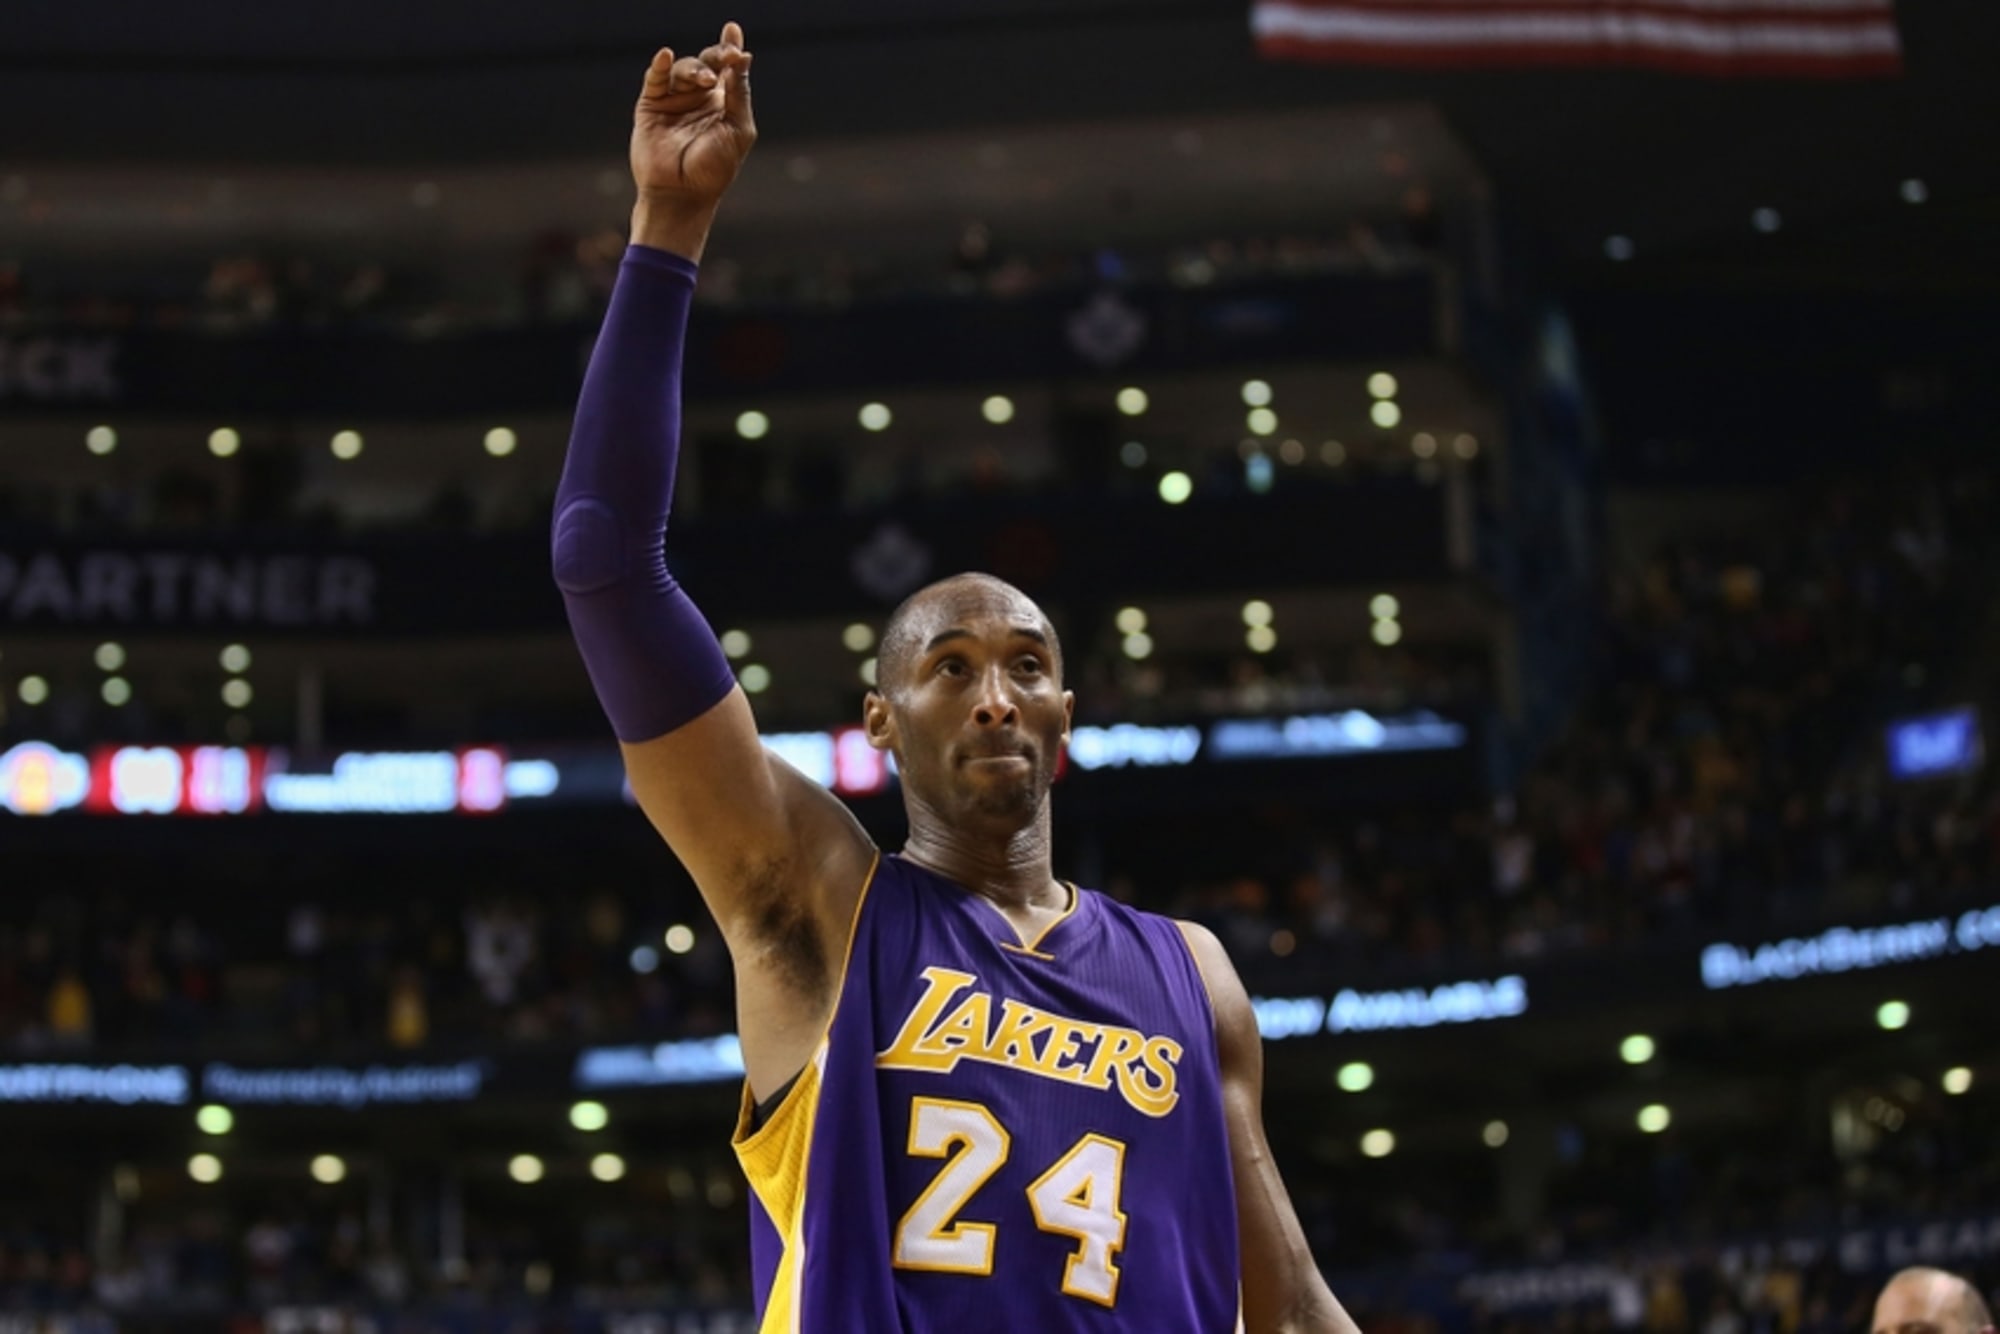 Oh, what a night: Kobe Bryant wants dream 81-point game 10 years